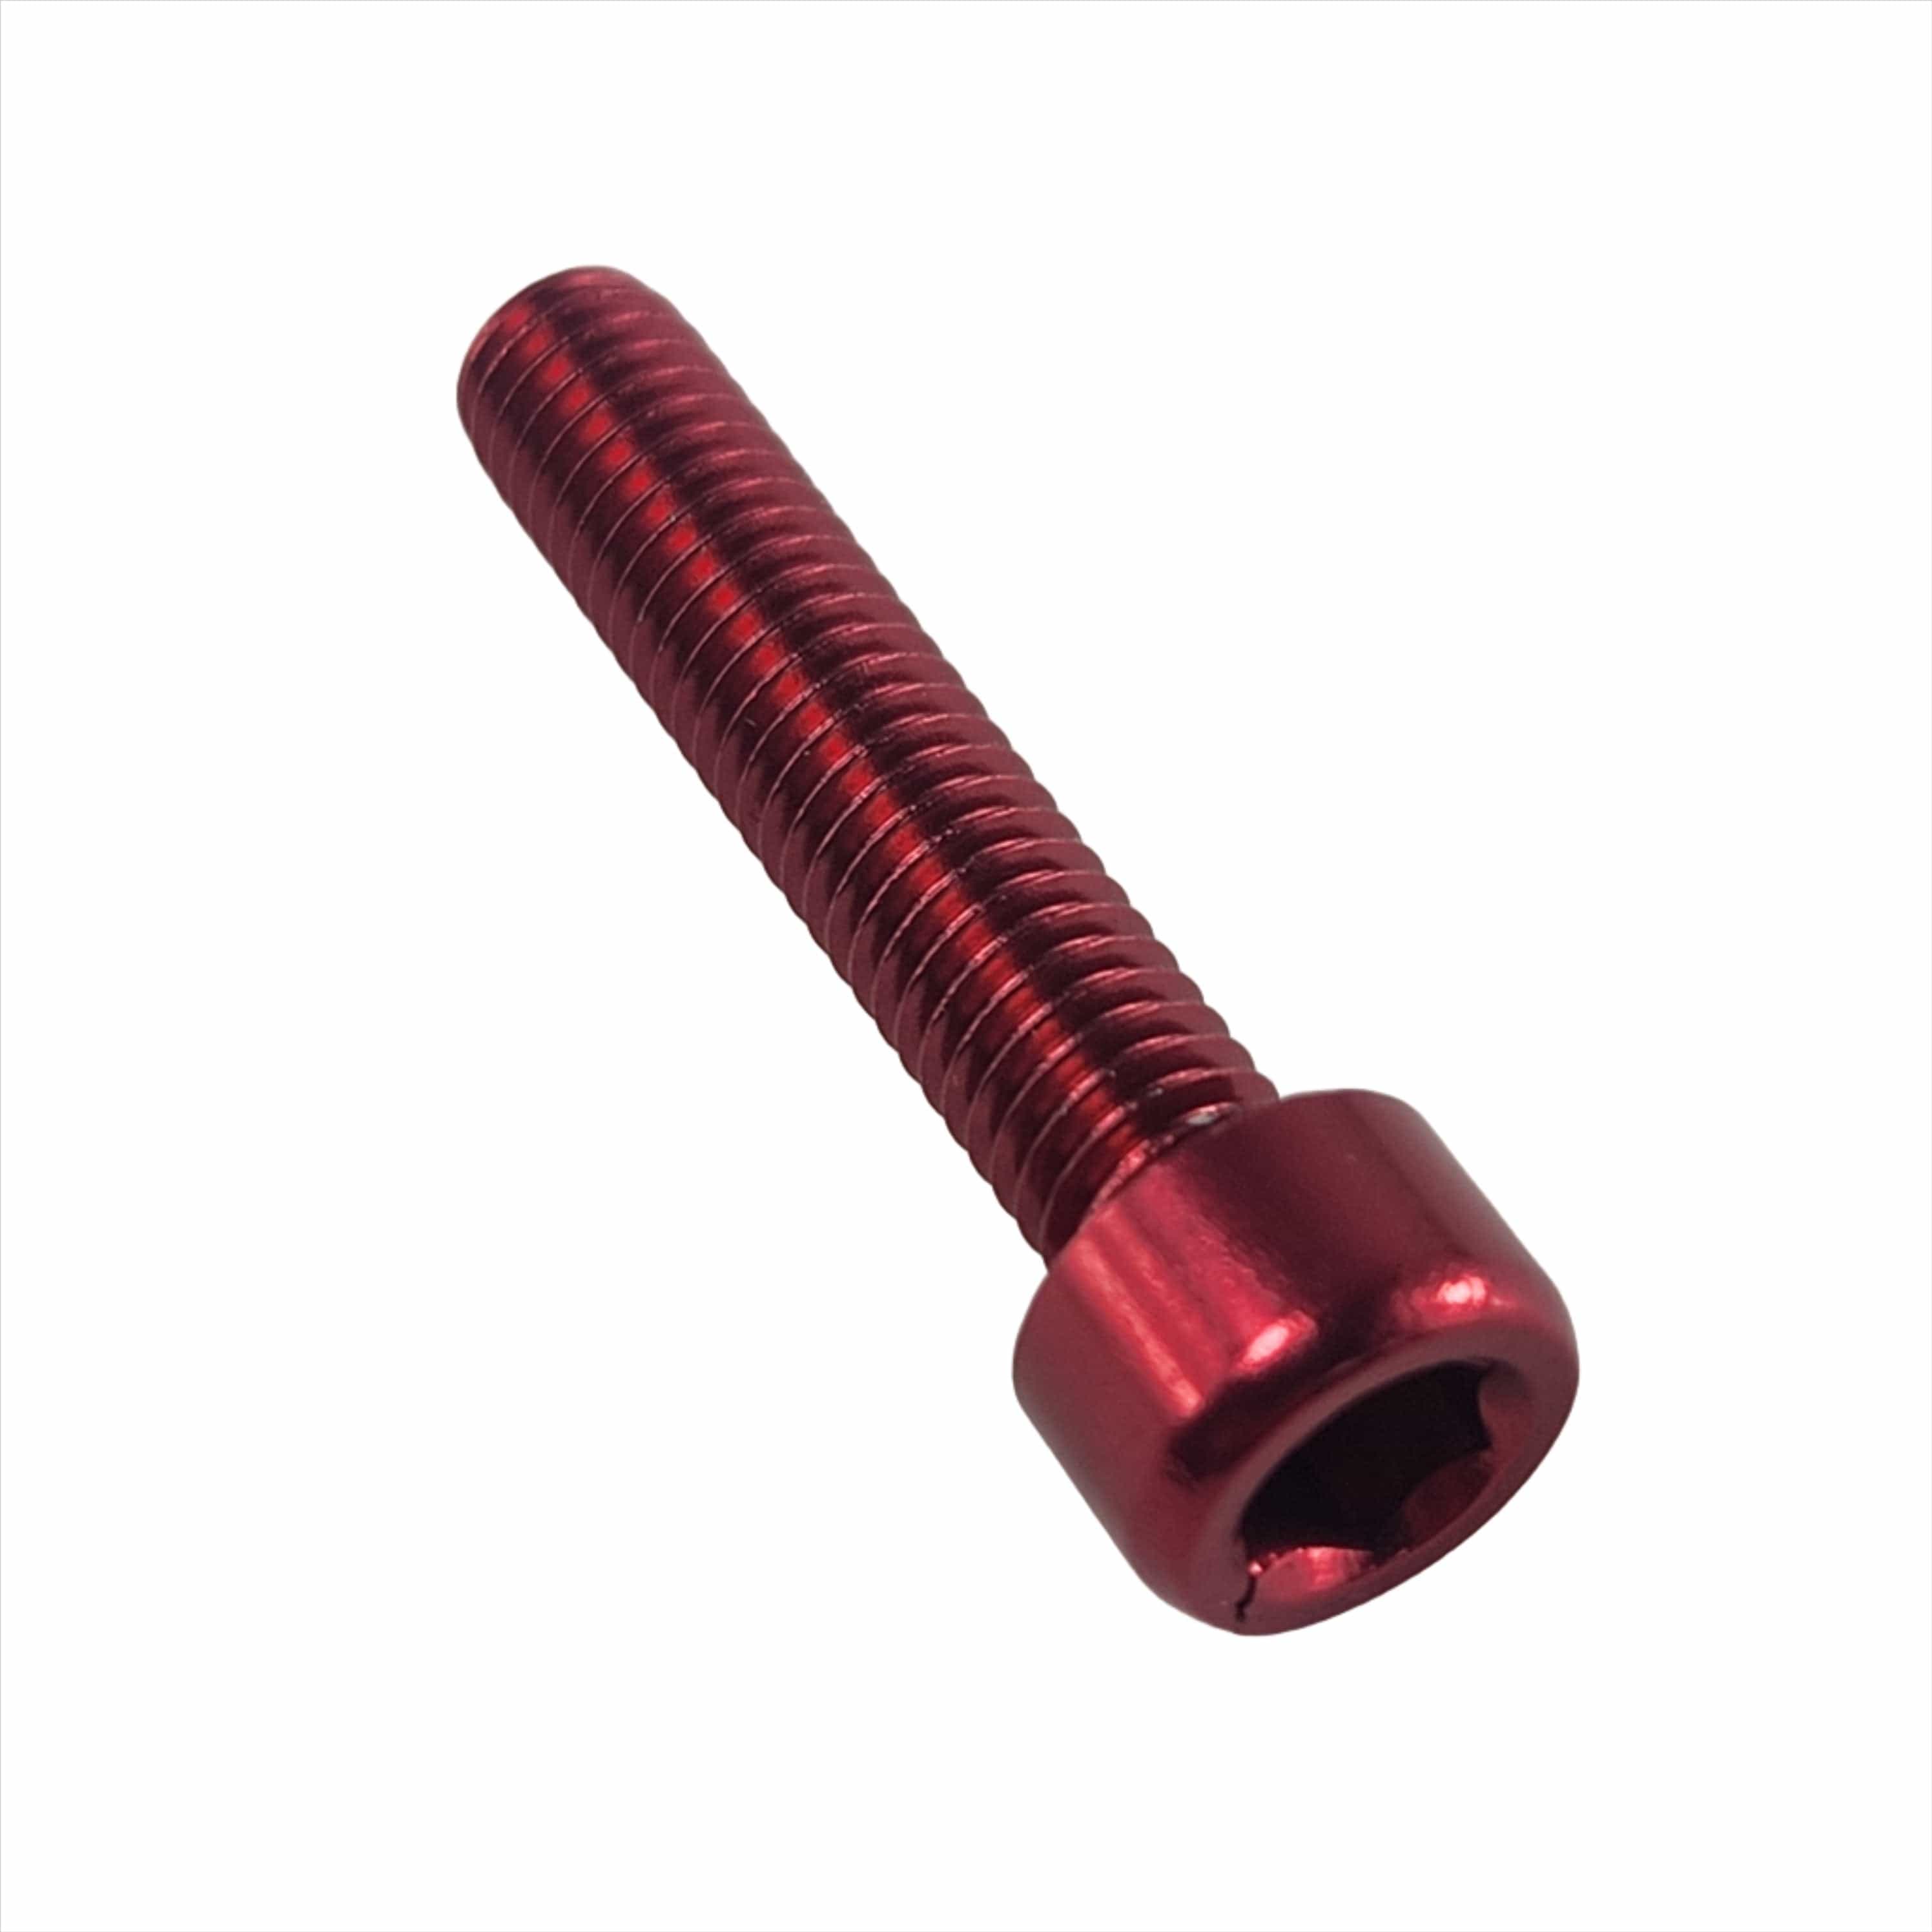 Witchdoctors Colored Bolt Kits Red Primary Cover Dress Up Bolts 40mm (Sold Each) by Witchdoctors 40-PRIM-COL-RED